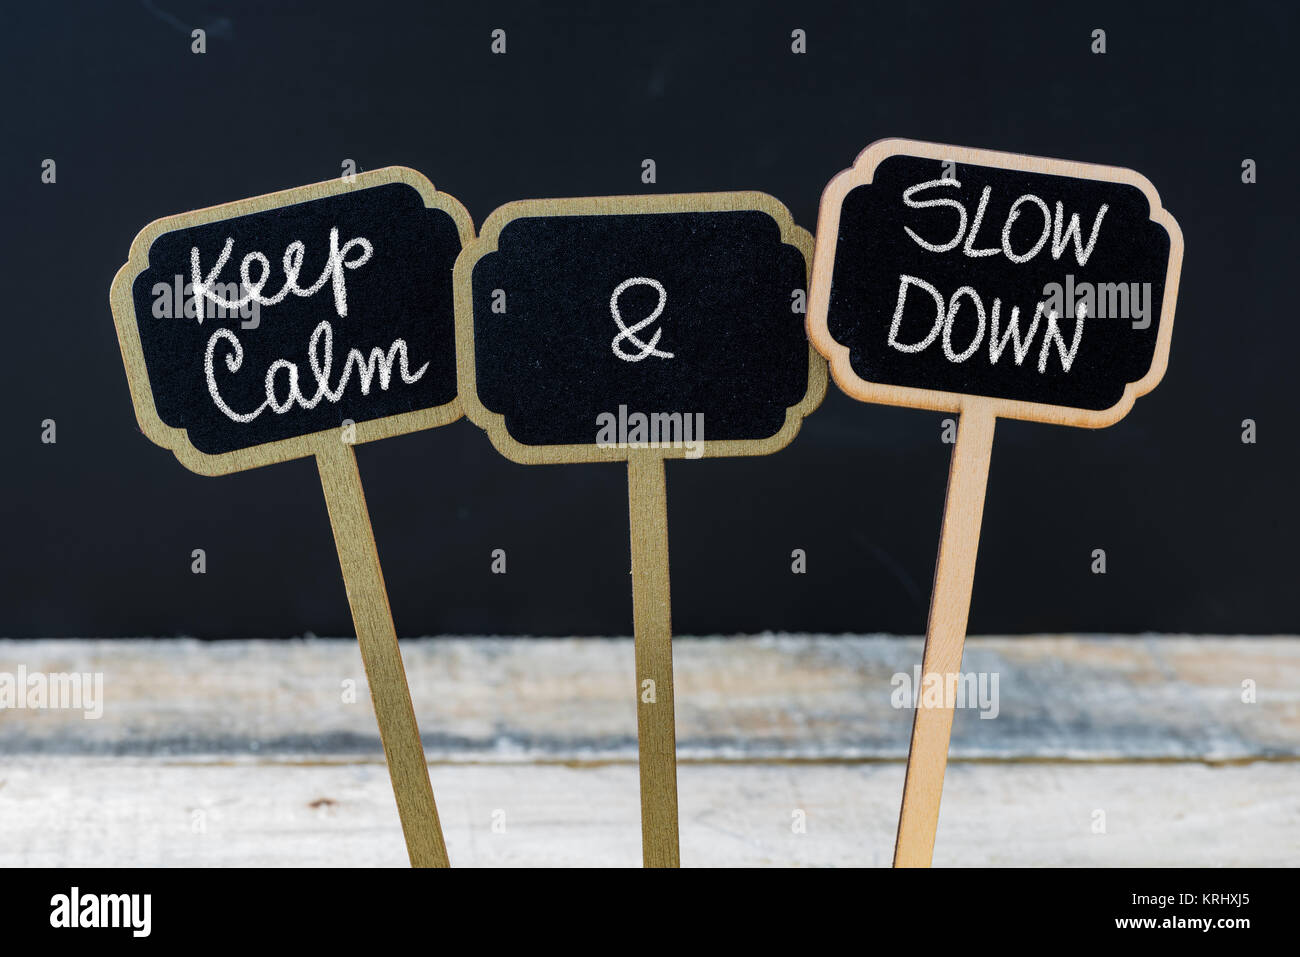 Keep Calm and Slow Down message written with chalk on mini blackboard labels Stock Photo